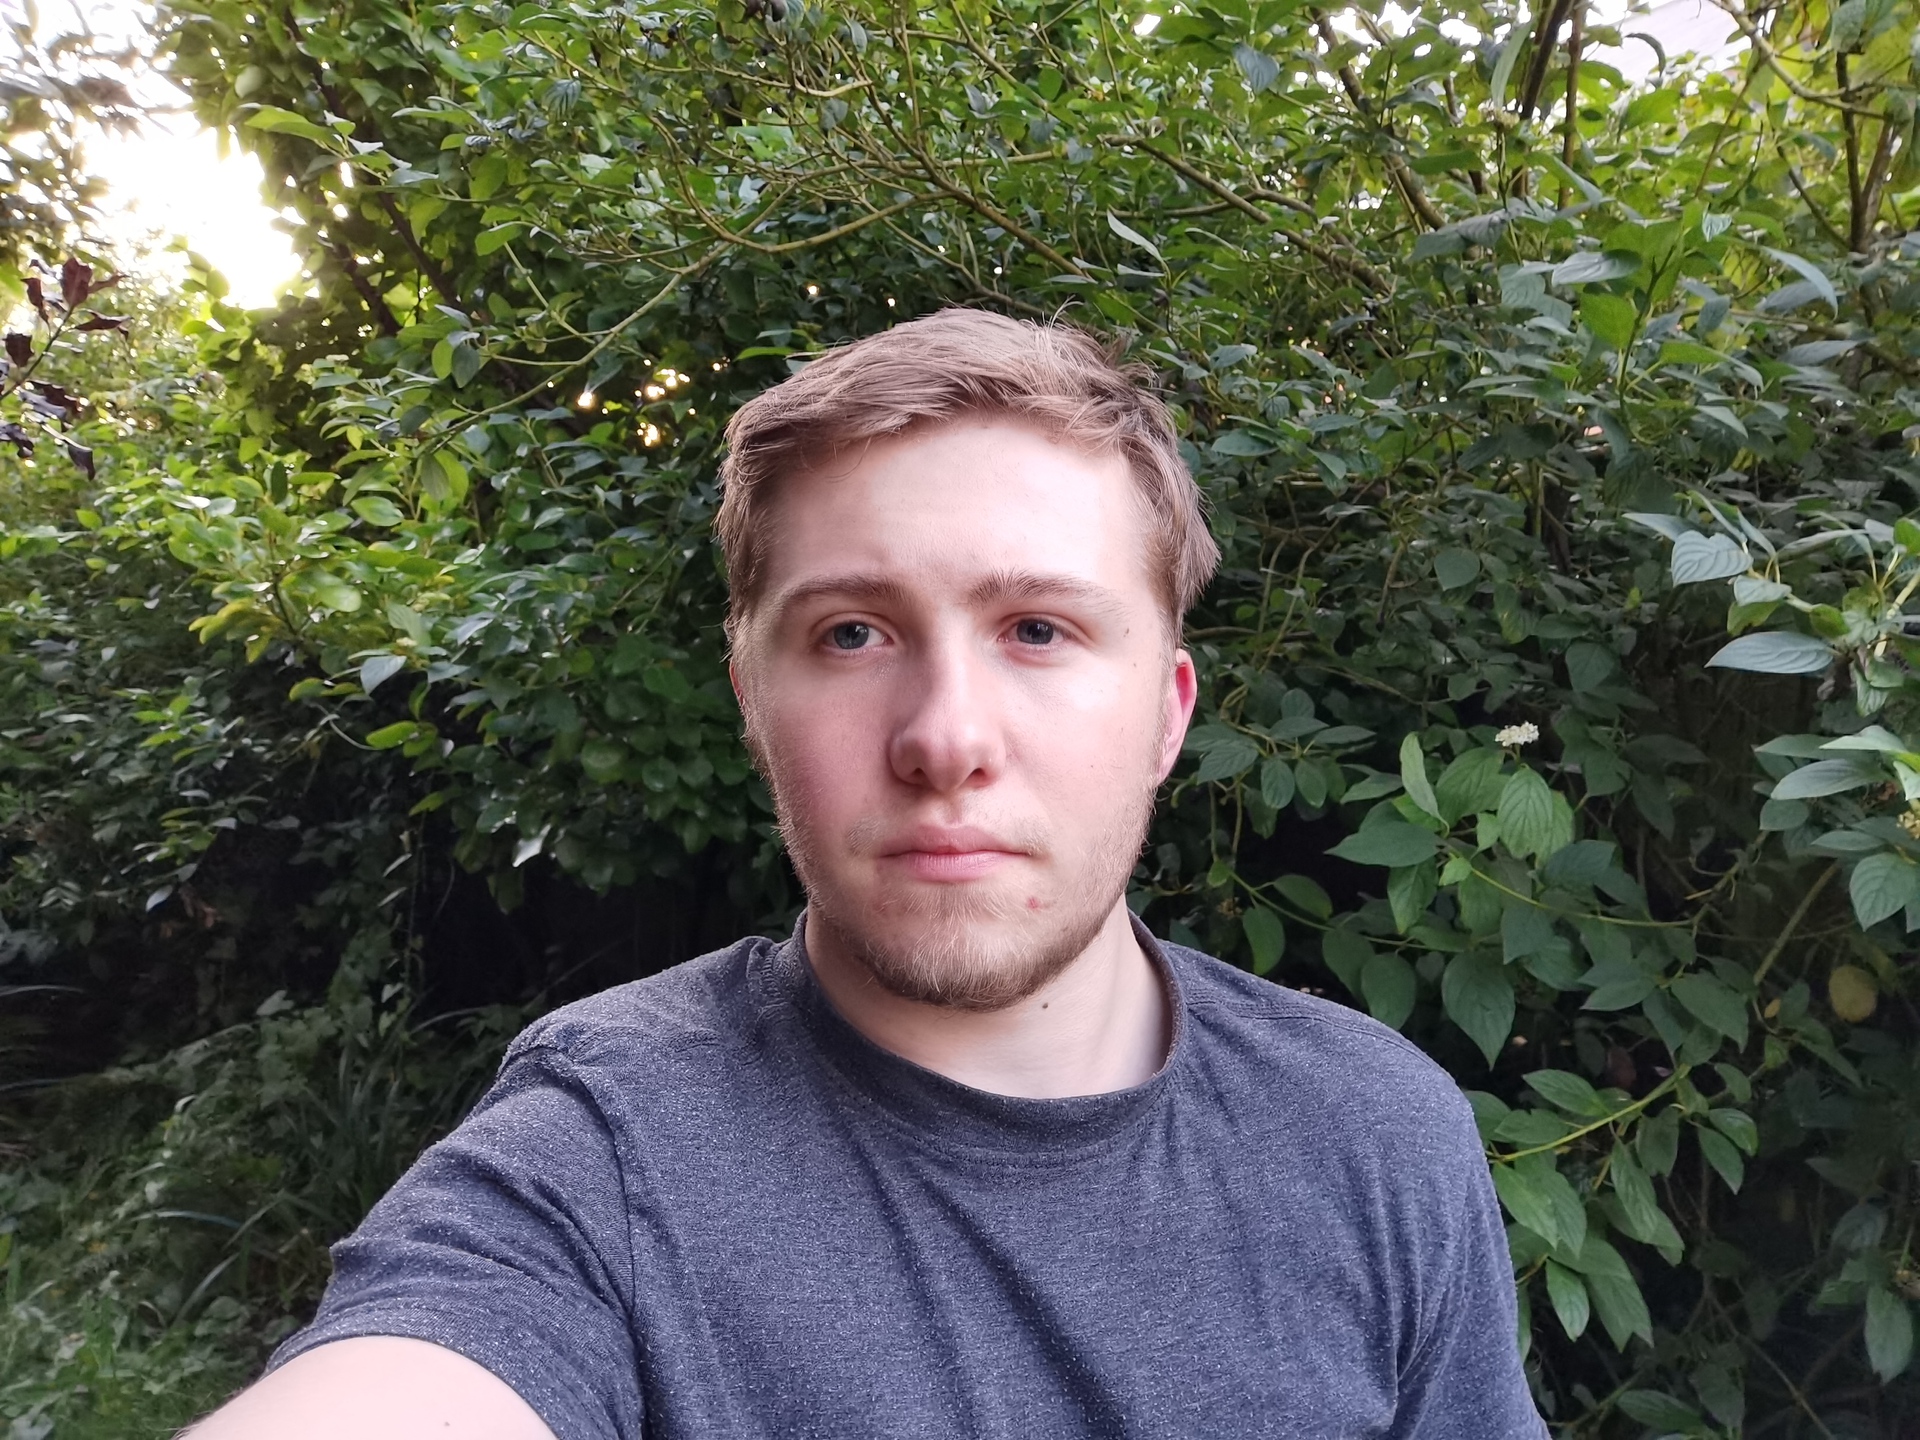 Huawei Mate 30 Pro Camera test Selfie in garden with light and plants